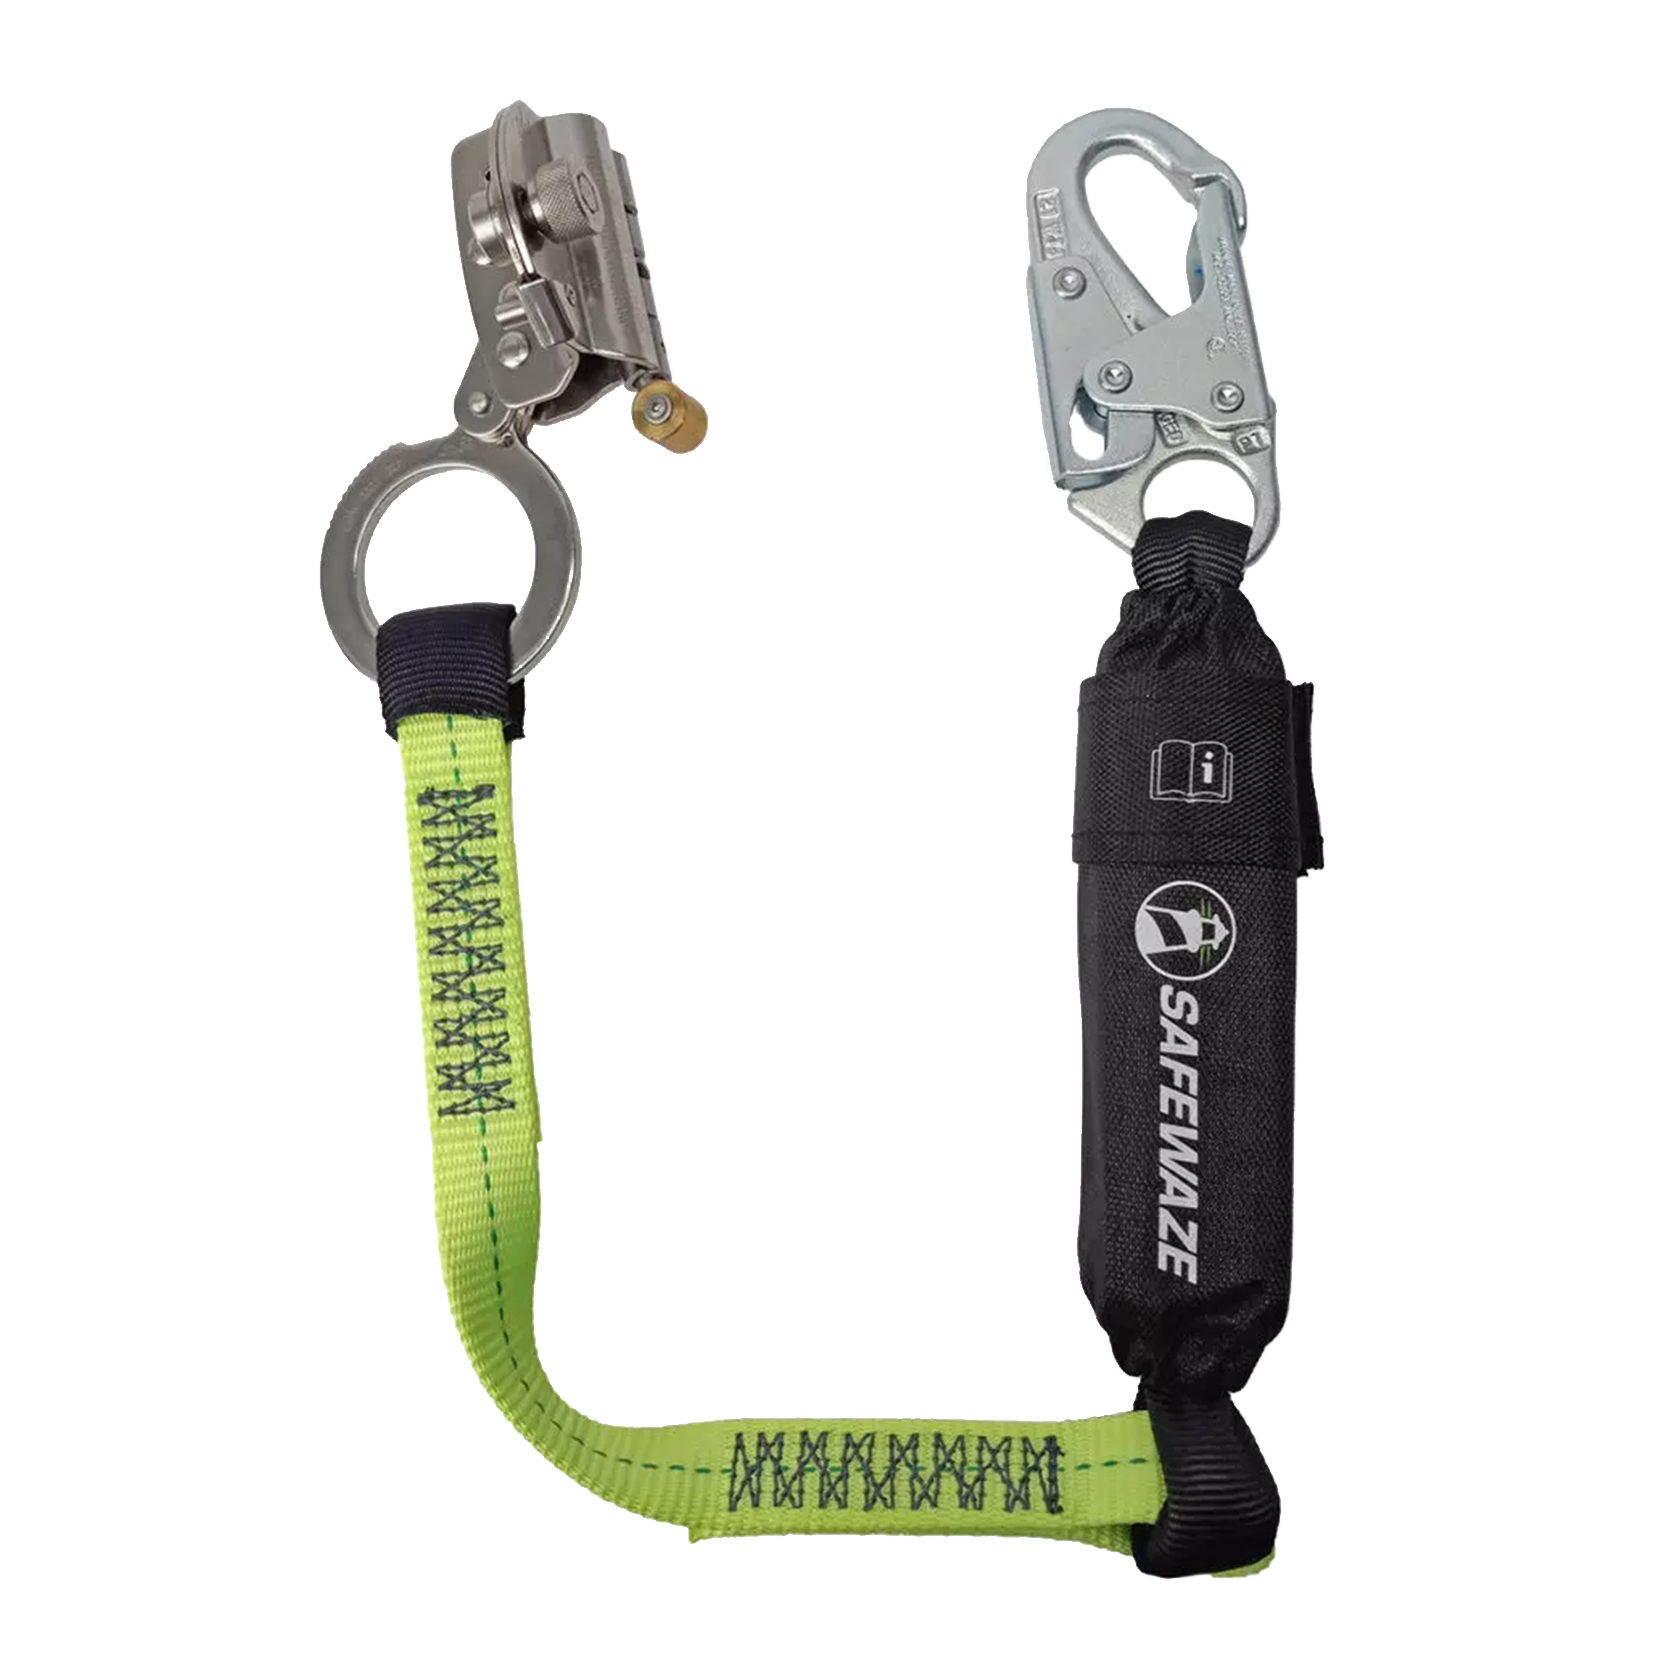 Trailing Rope Grab Assembly with Web Energy Absorbing Lanyard Manual